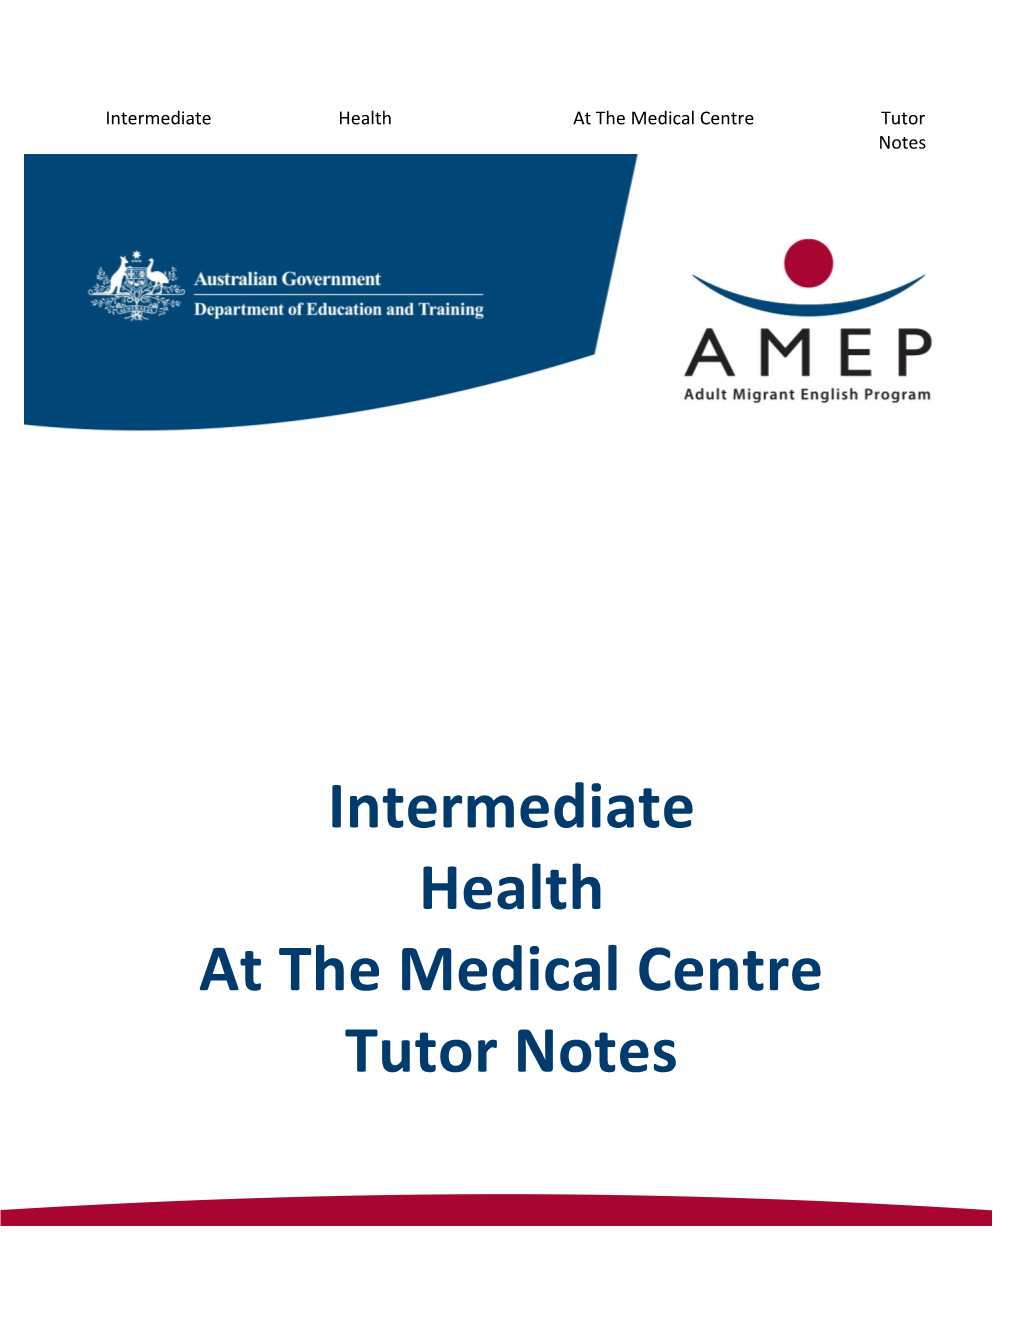 Intermediate Health at the Medical Centre Tutor Notes